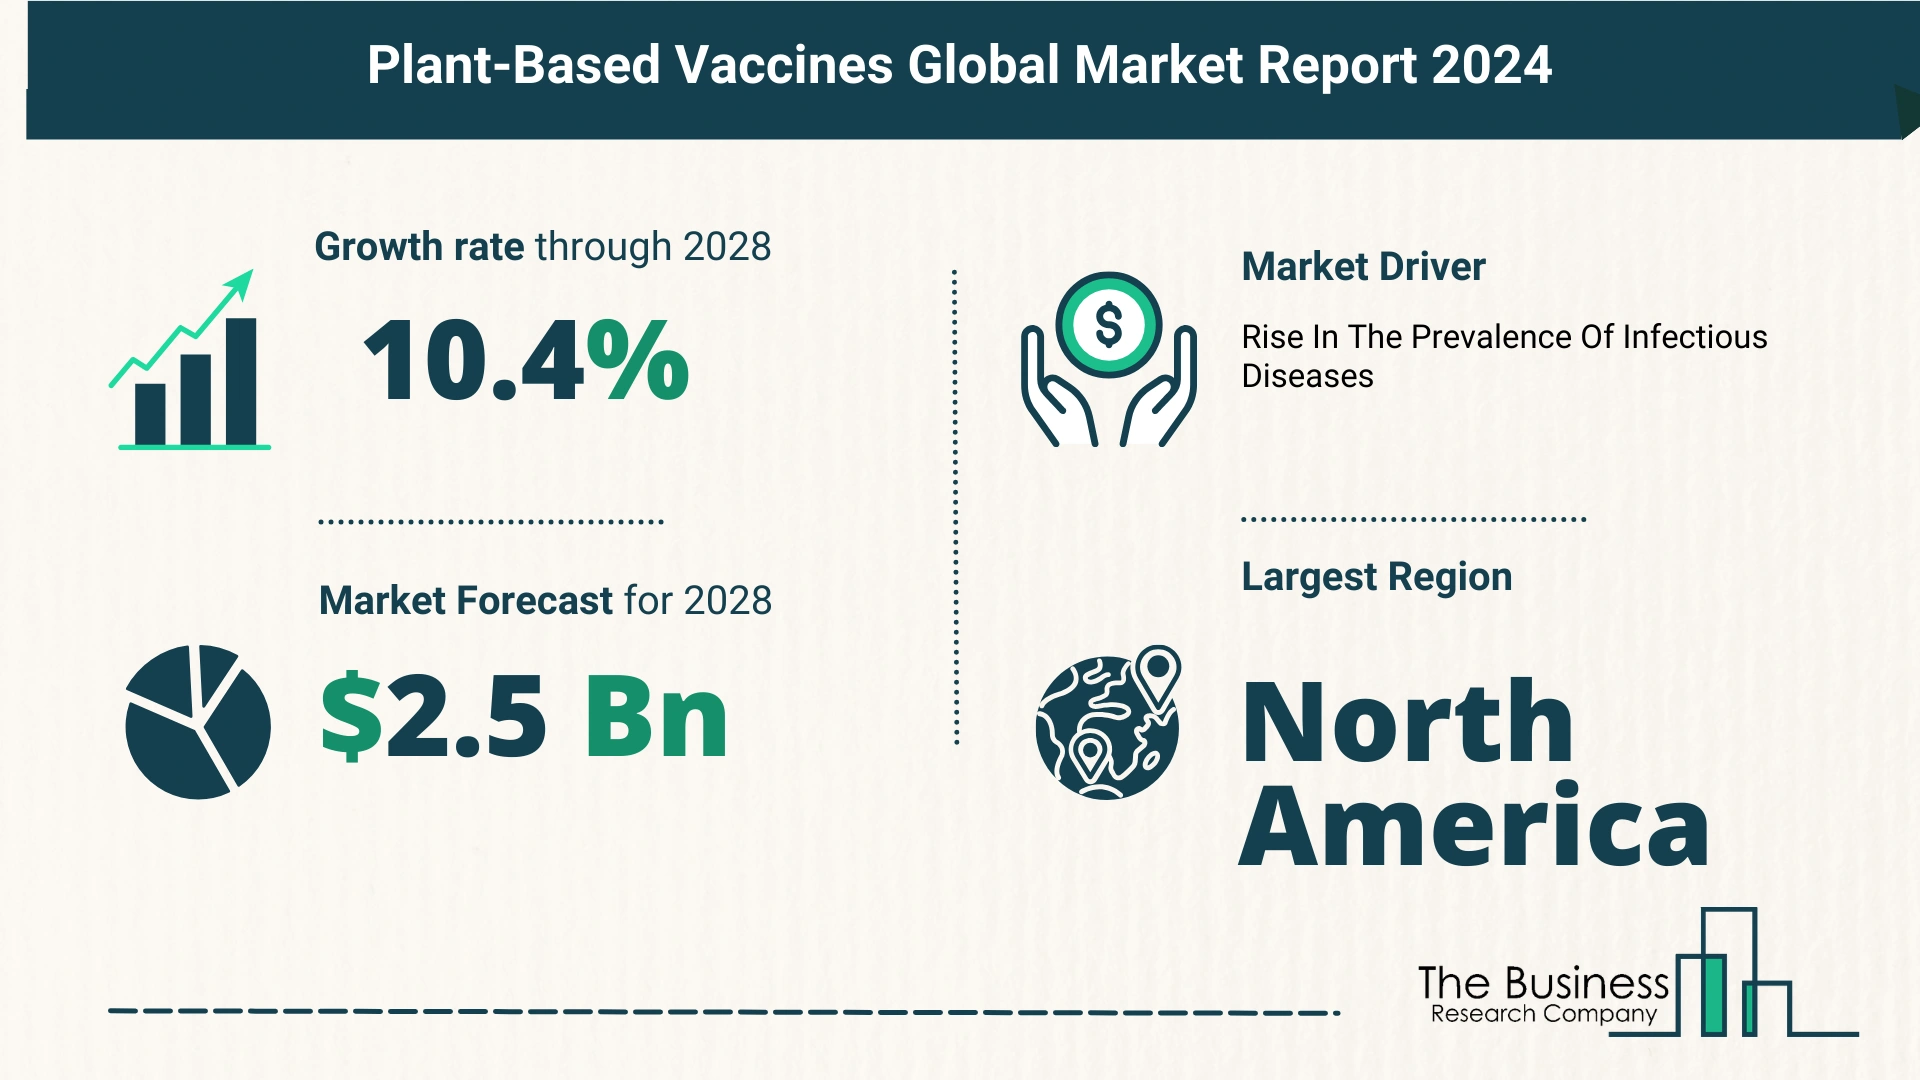 Top 5 Insights From The Plant-Based Vaccines Market Report 2024